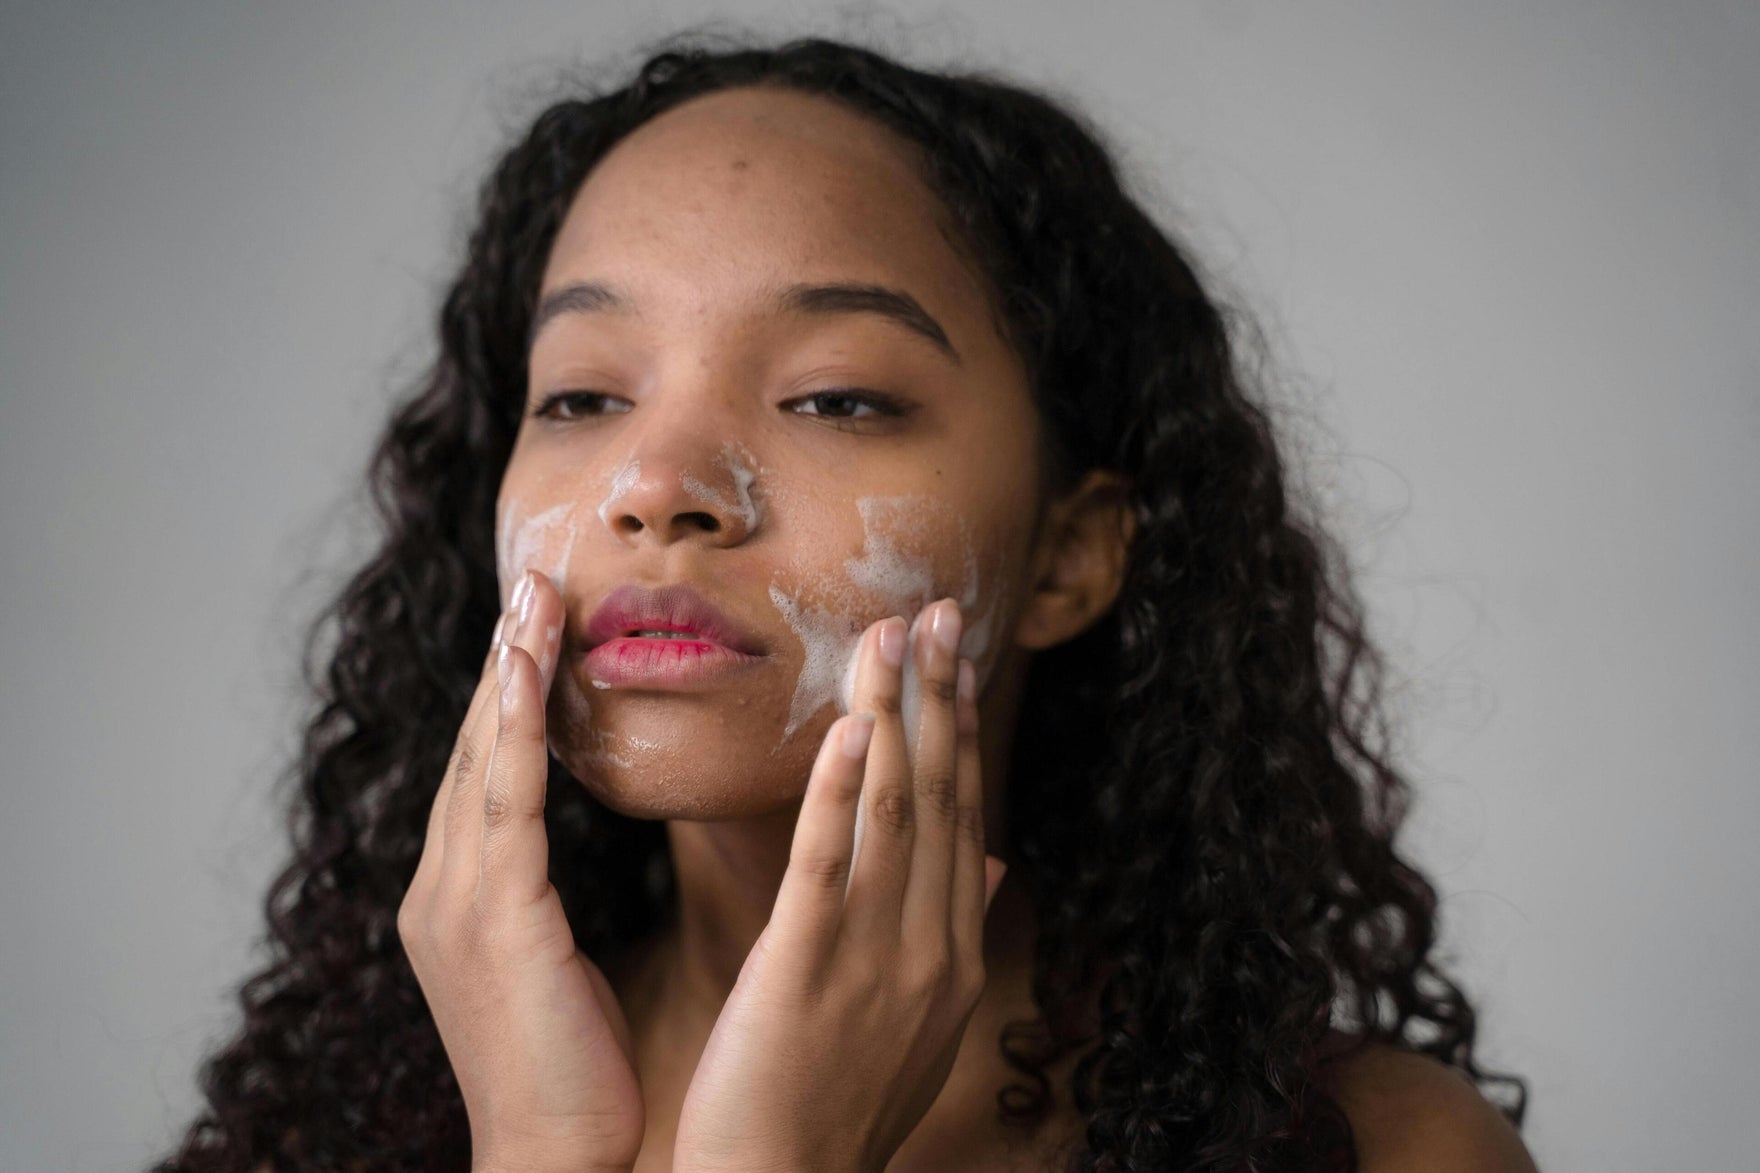 Teen and Tween Skincare: Building a Healthy Routine